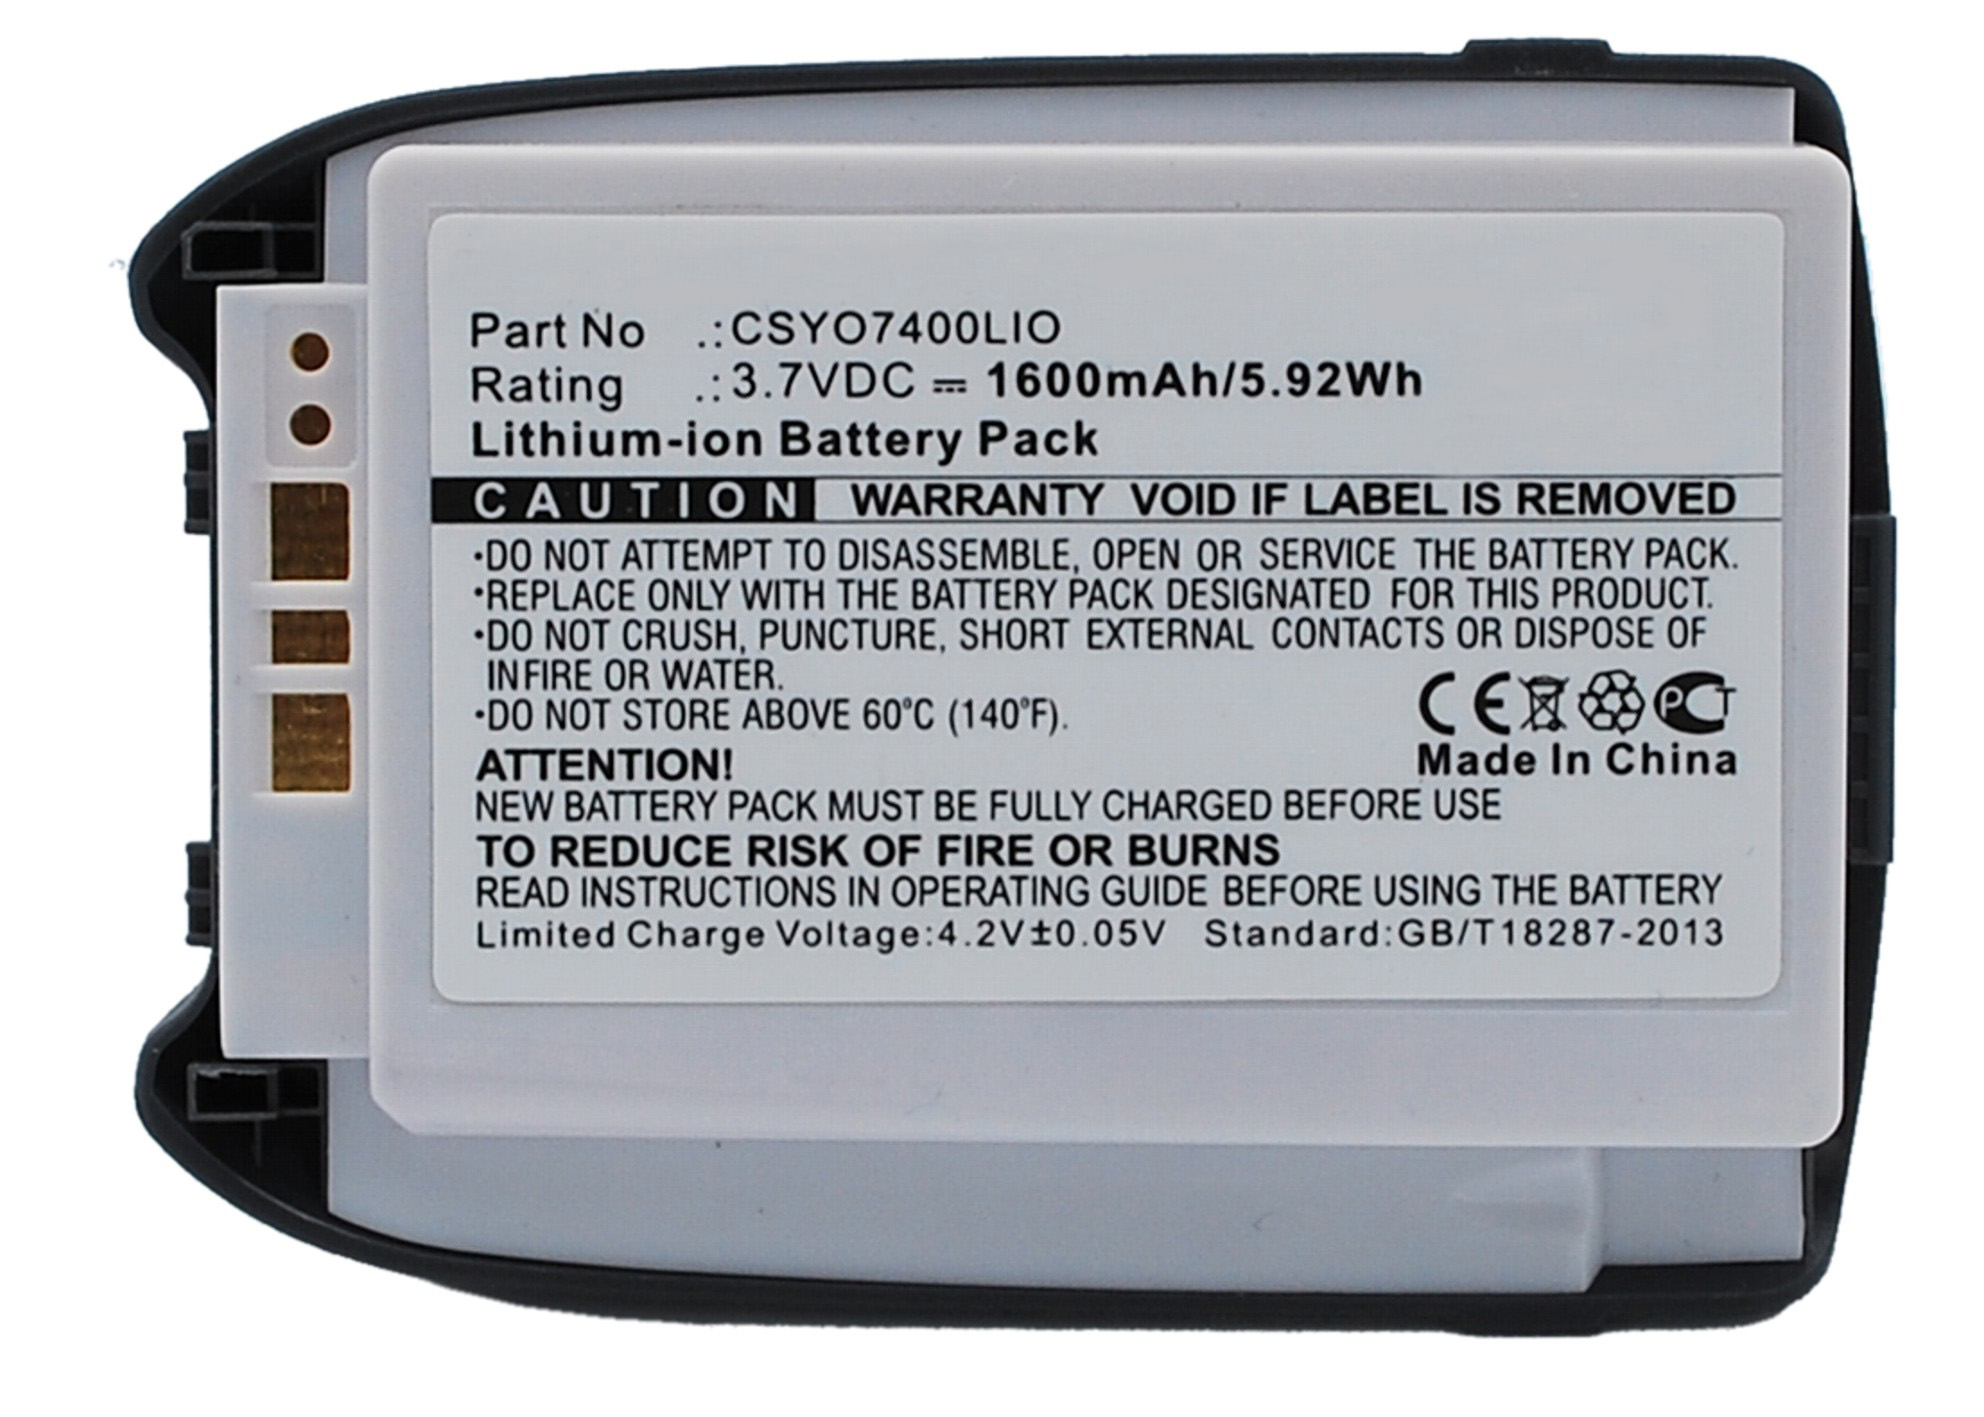 Synergy Digital Battery Compatible With Sanyo CSYO7400LIO Cellphone Battery - (Li-Ion, 3.7V, 1600 mAh / 5.92Wh)